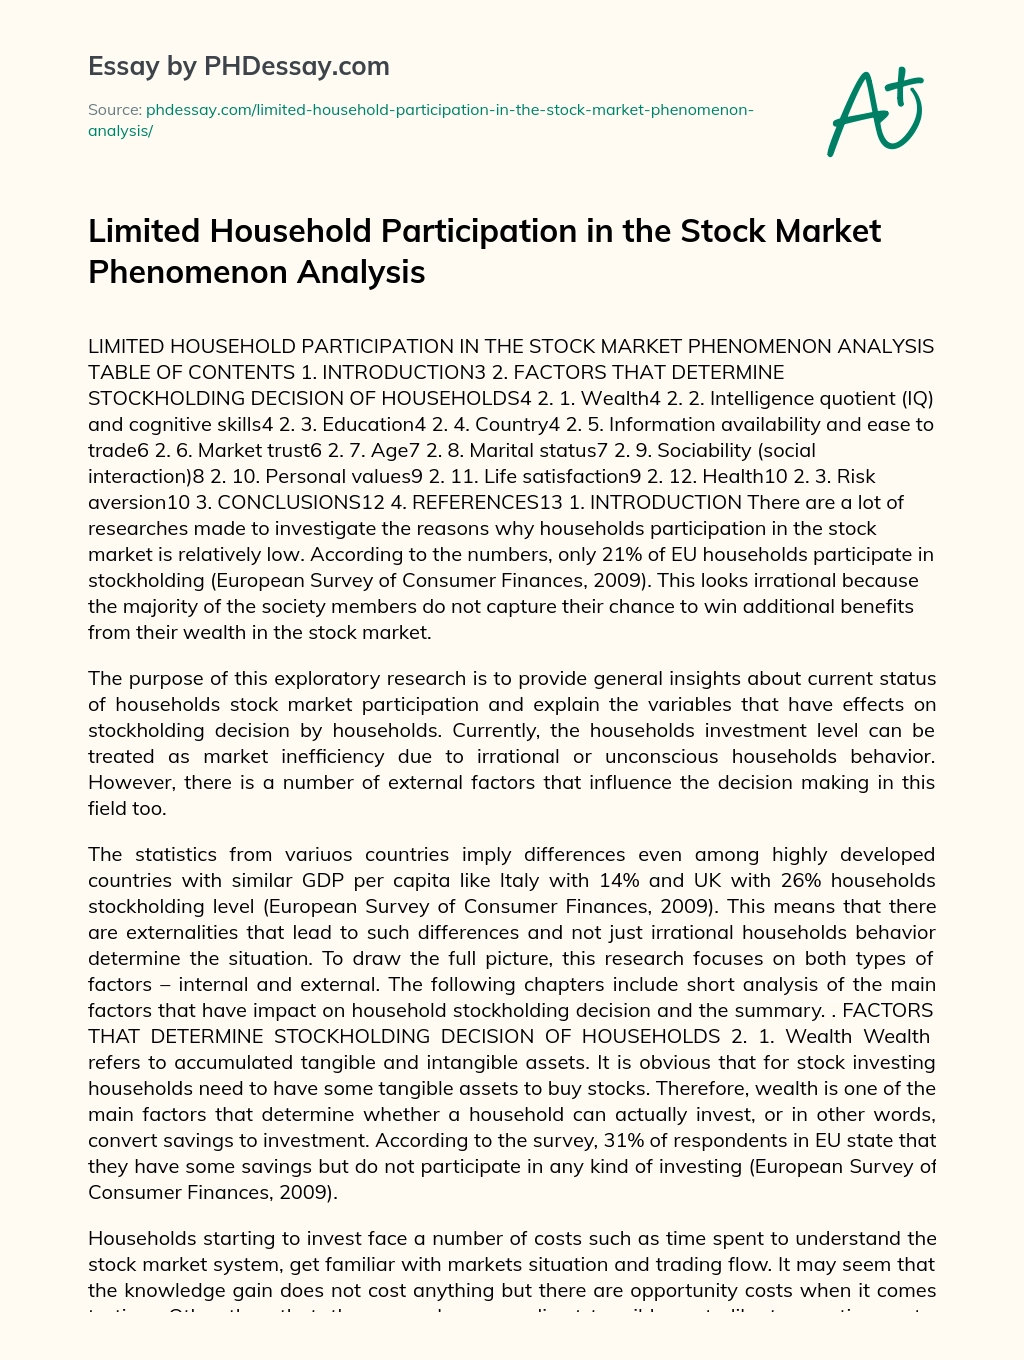 Limited Household Participation in the Stock Market Phenomenon Analysis essay